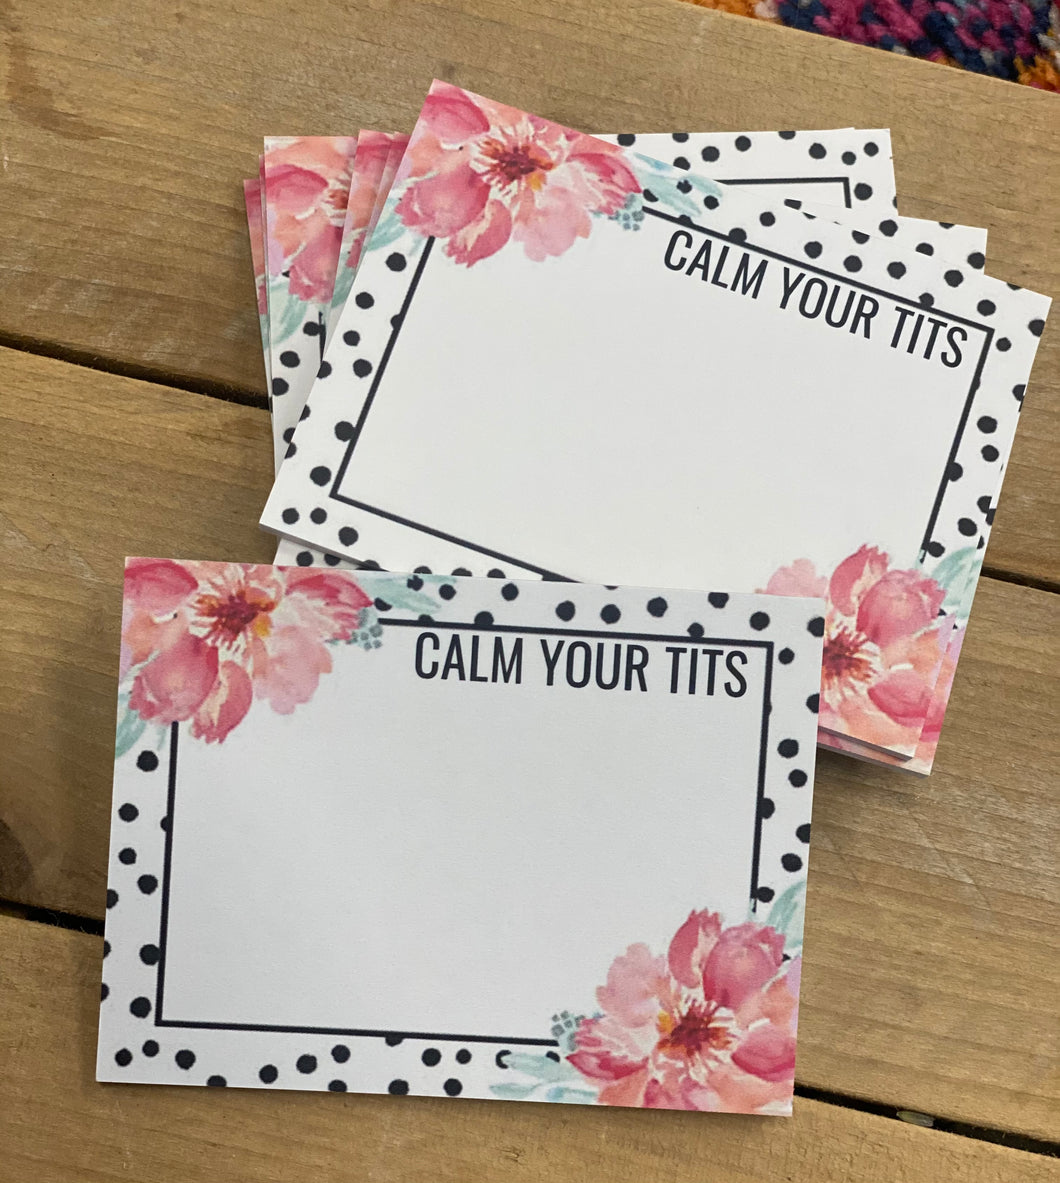 Calm Your Tits sticky note